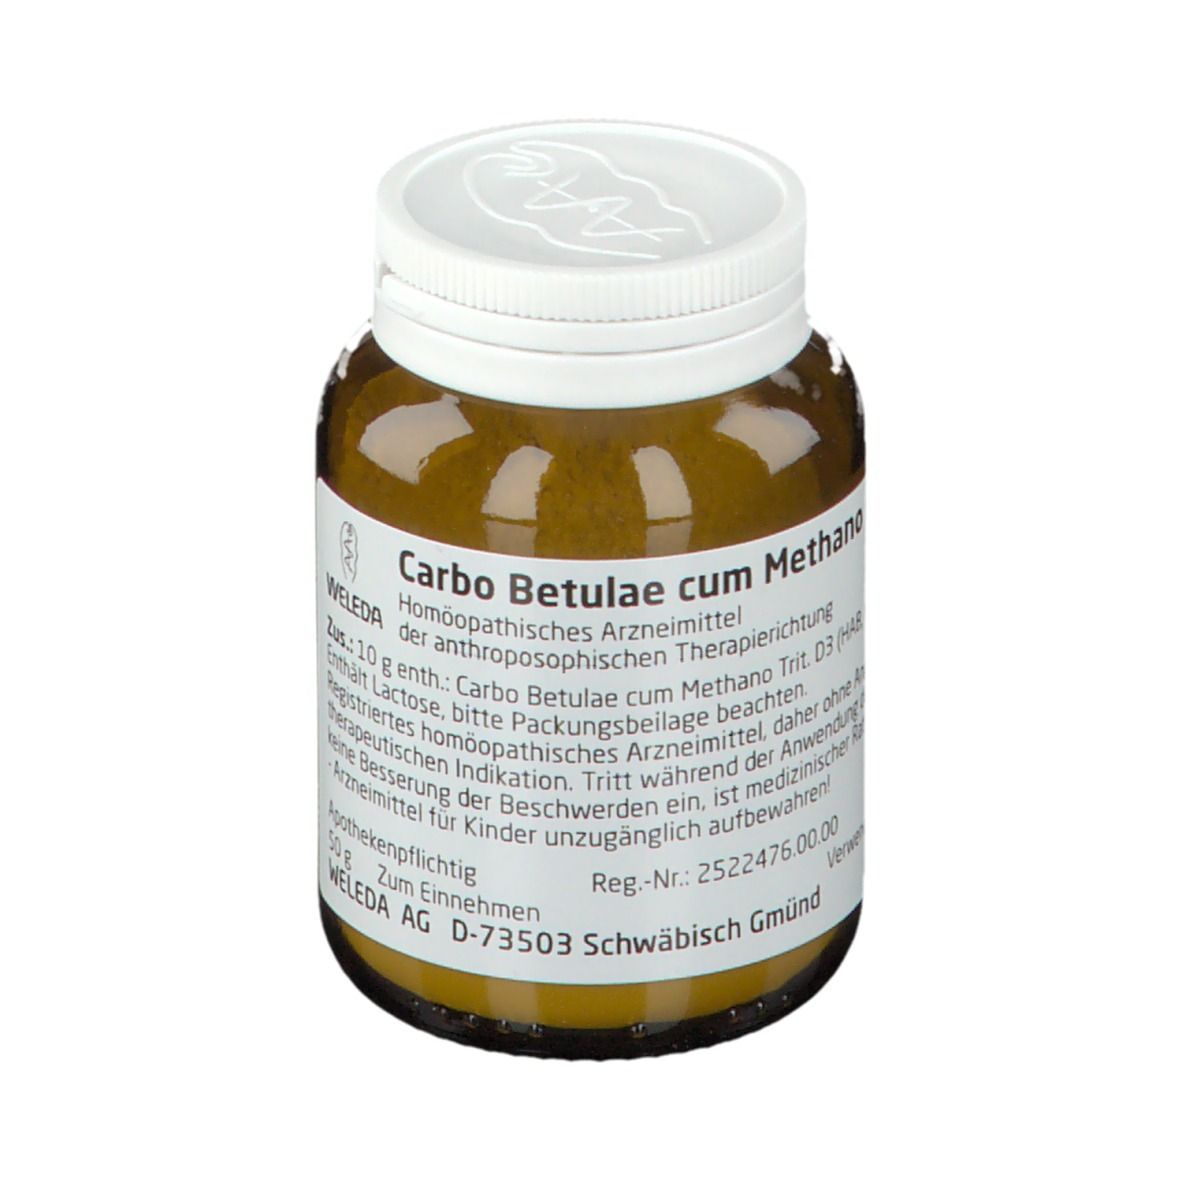 Carbo Betulae c. Methano D3 Trituration